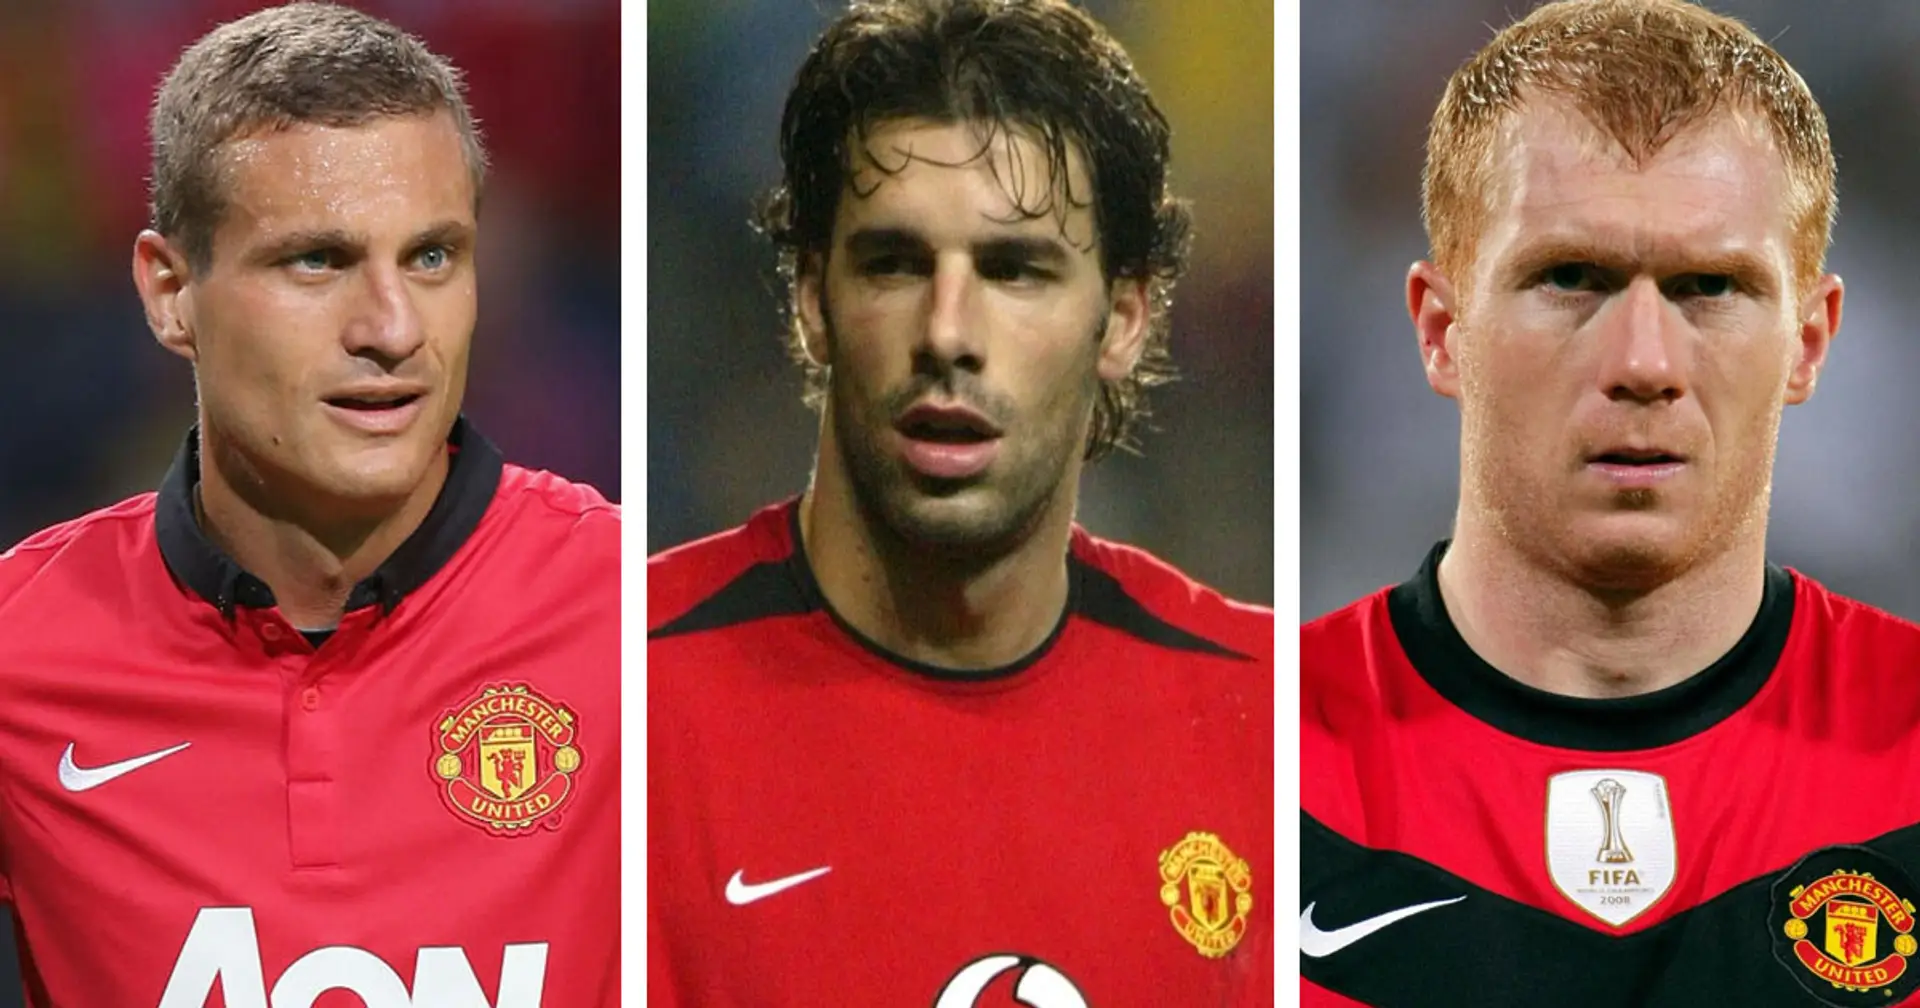 Scholes, Vidic & more: 12 Man United players shortlisted for Premier League Hall of Fame induction